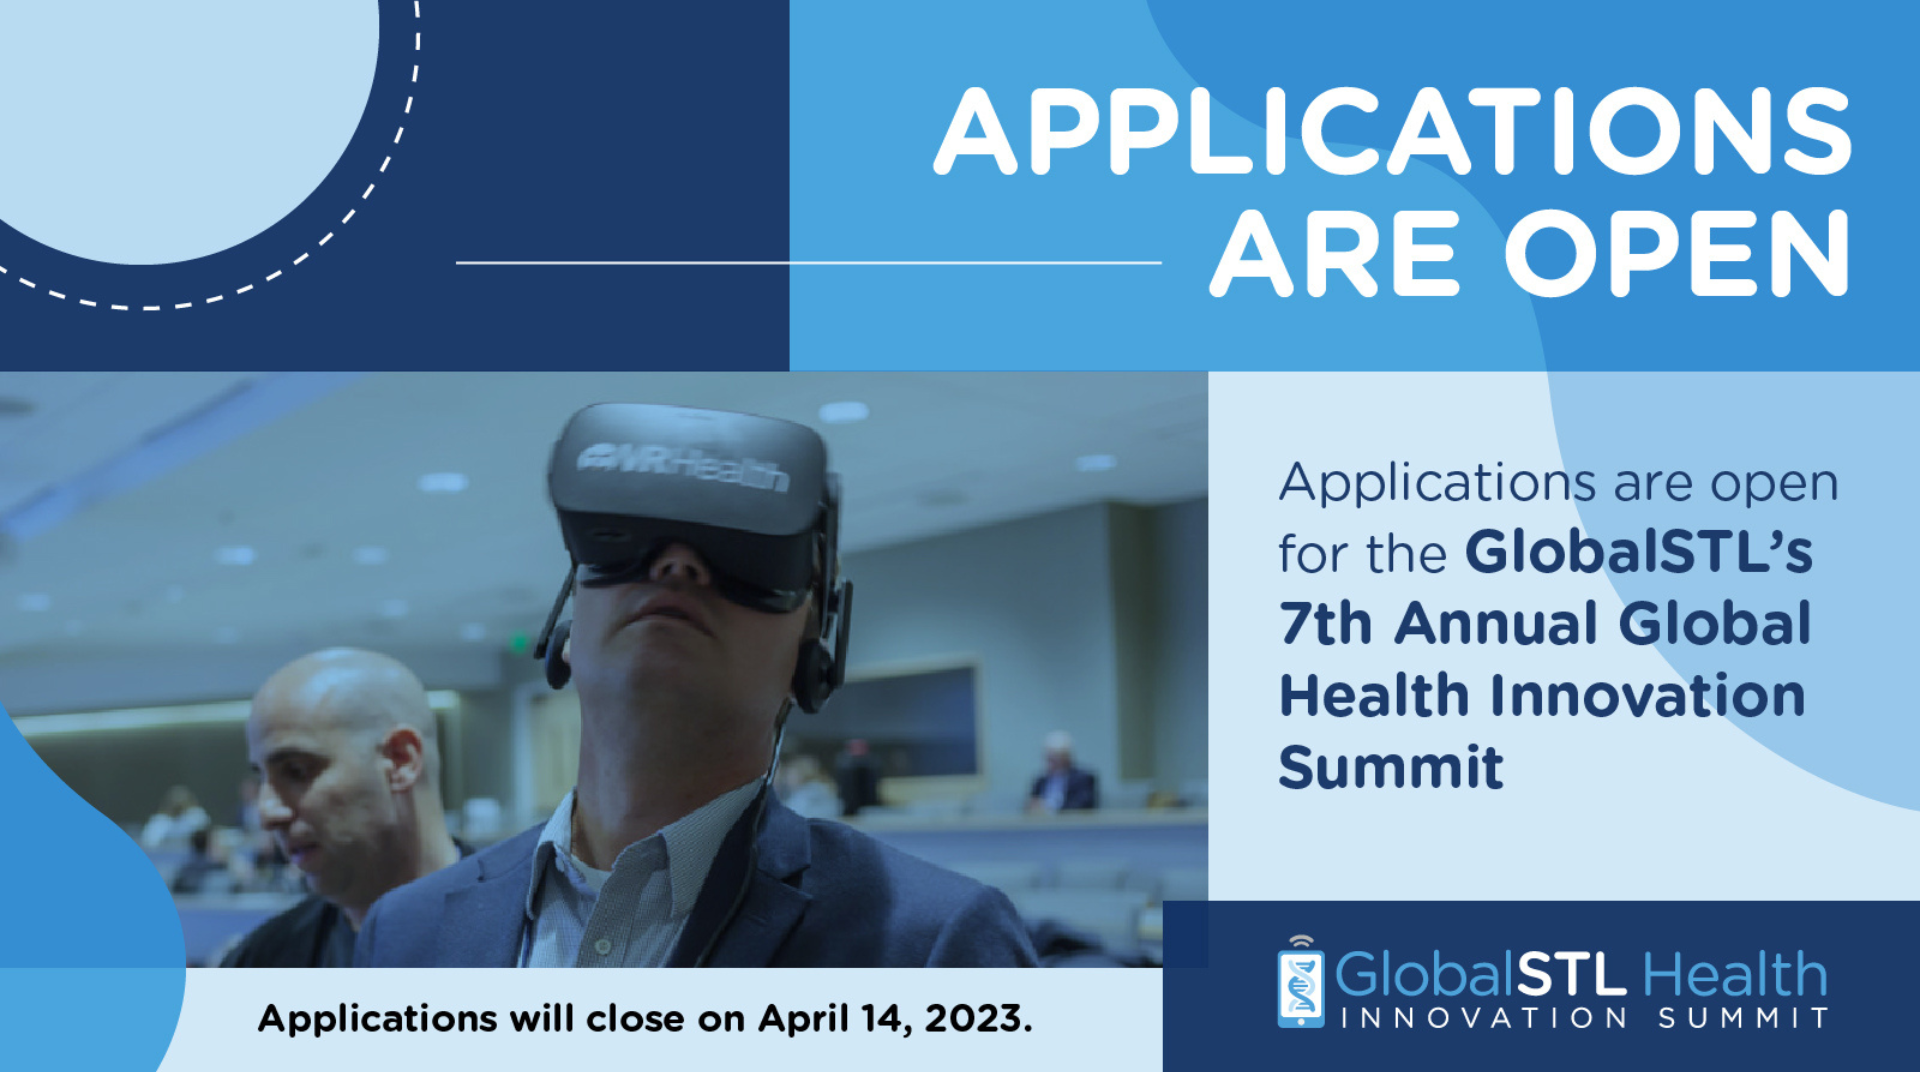 Take your next step to the U.S. healthcare market with the GlobalSTL Health Innovation Summit